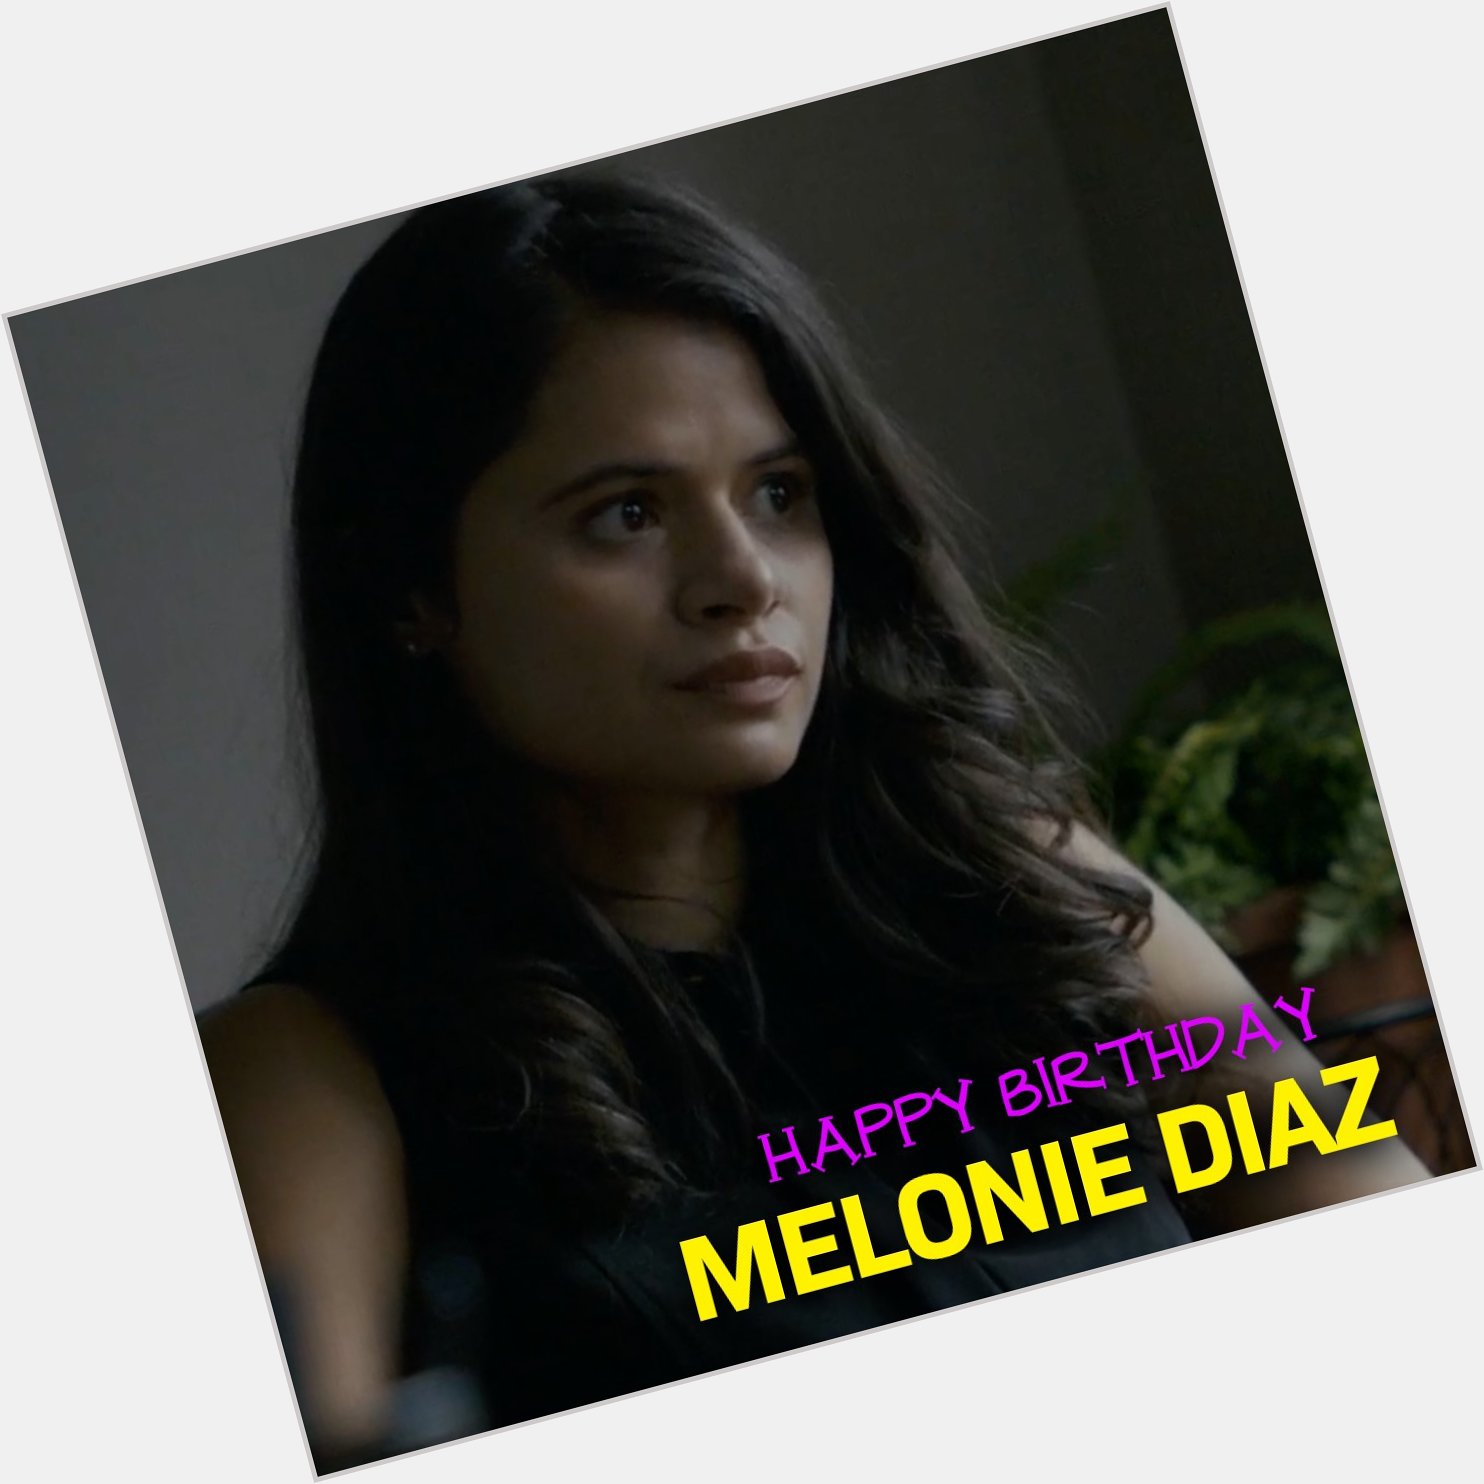 Wishing a happy birthday to the very talented Melonie Diaz! She played Ms. Meier in our 2017 film, AND THEN I GO. 